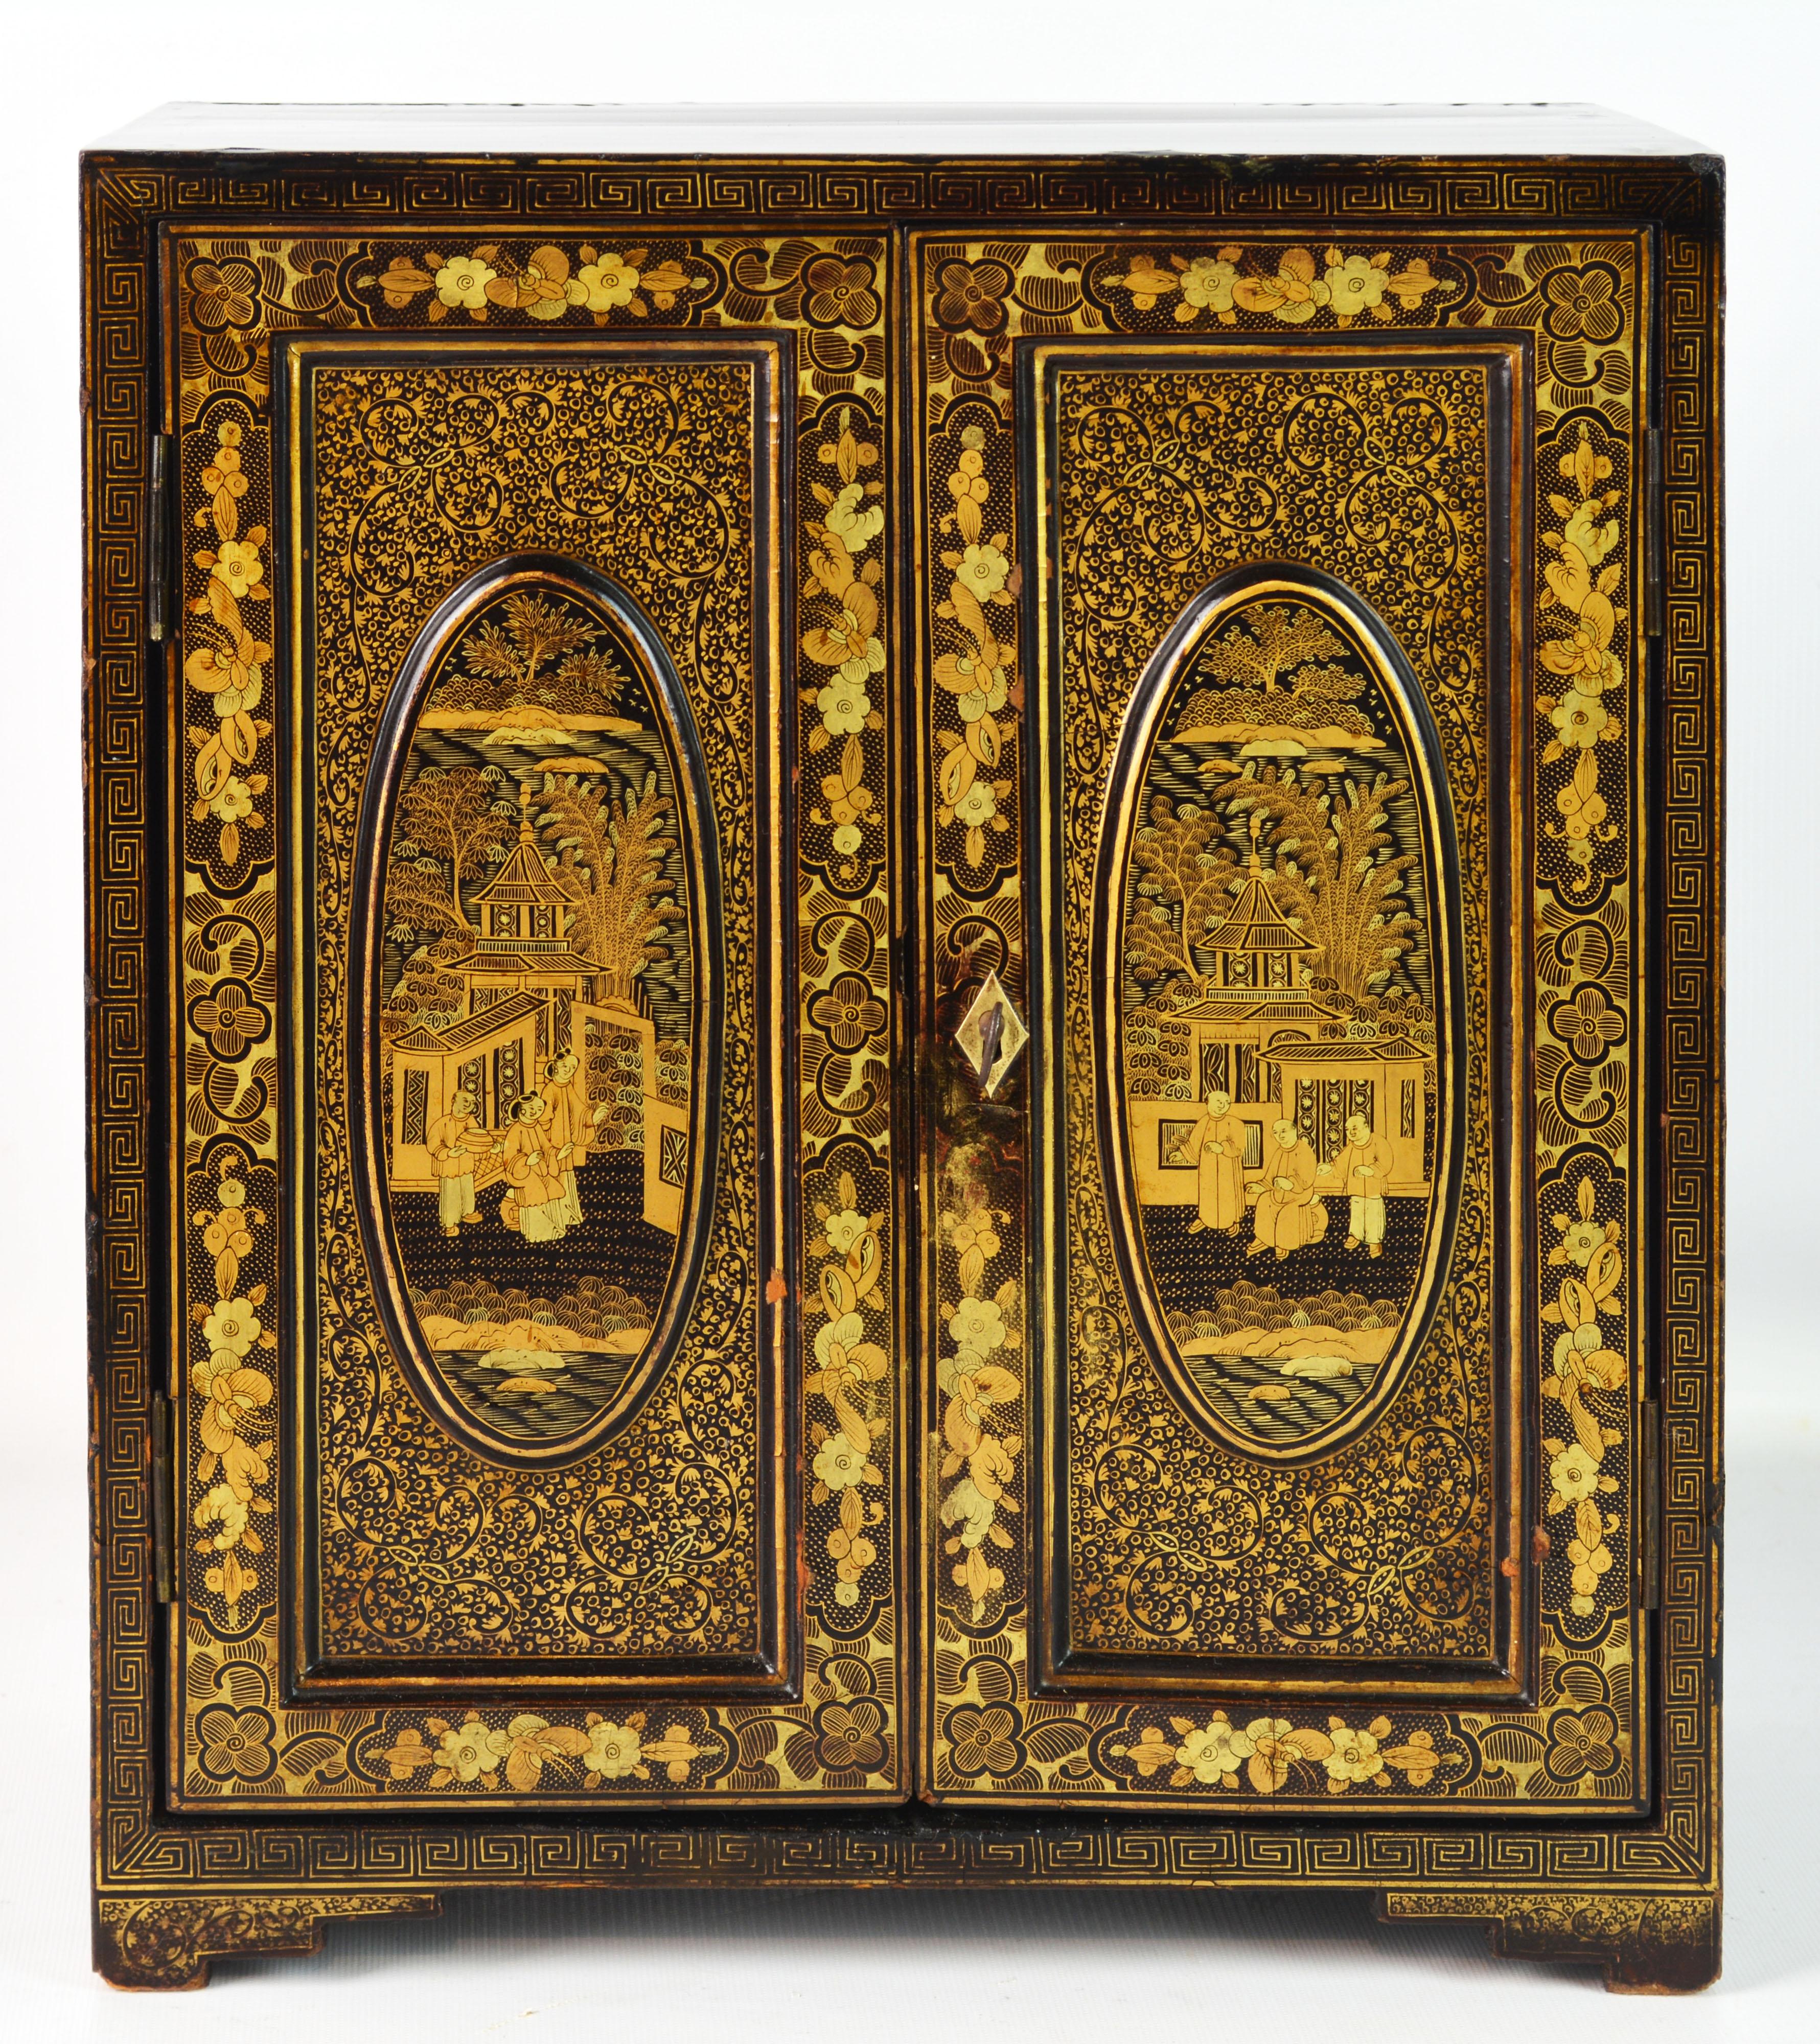 Chinoiserie 19th Century Chinese Miniature Lacquer and Gilt Table Cabinet or Jewelry Chest